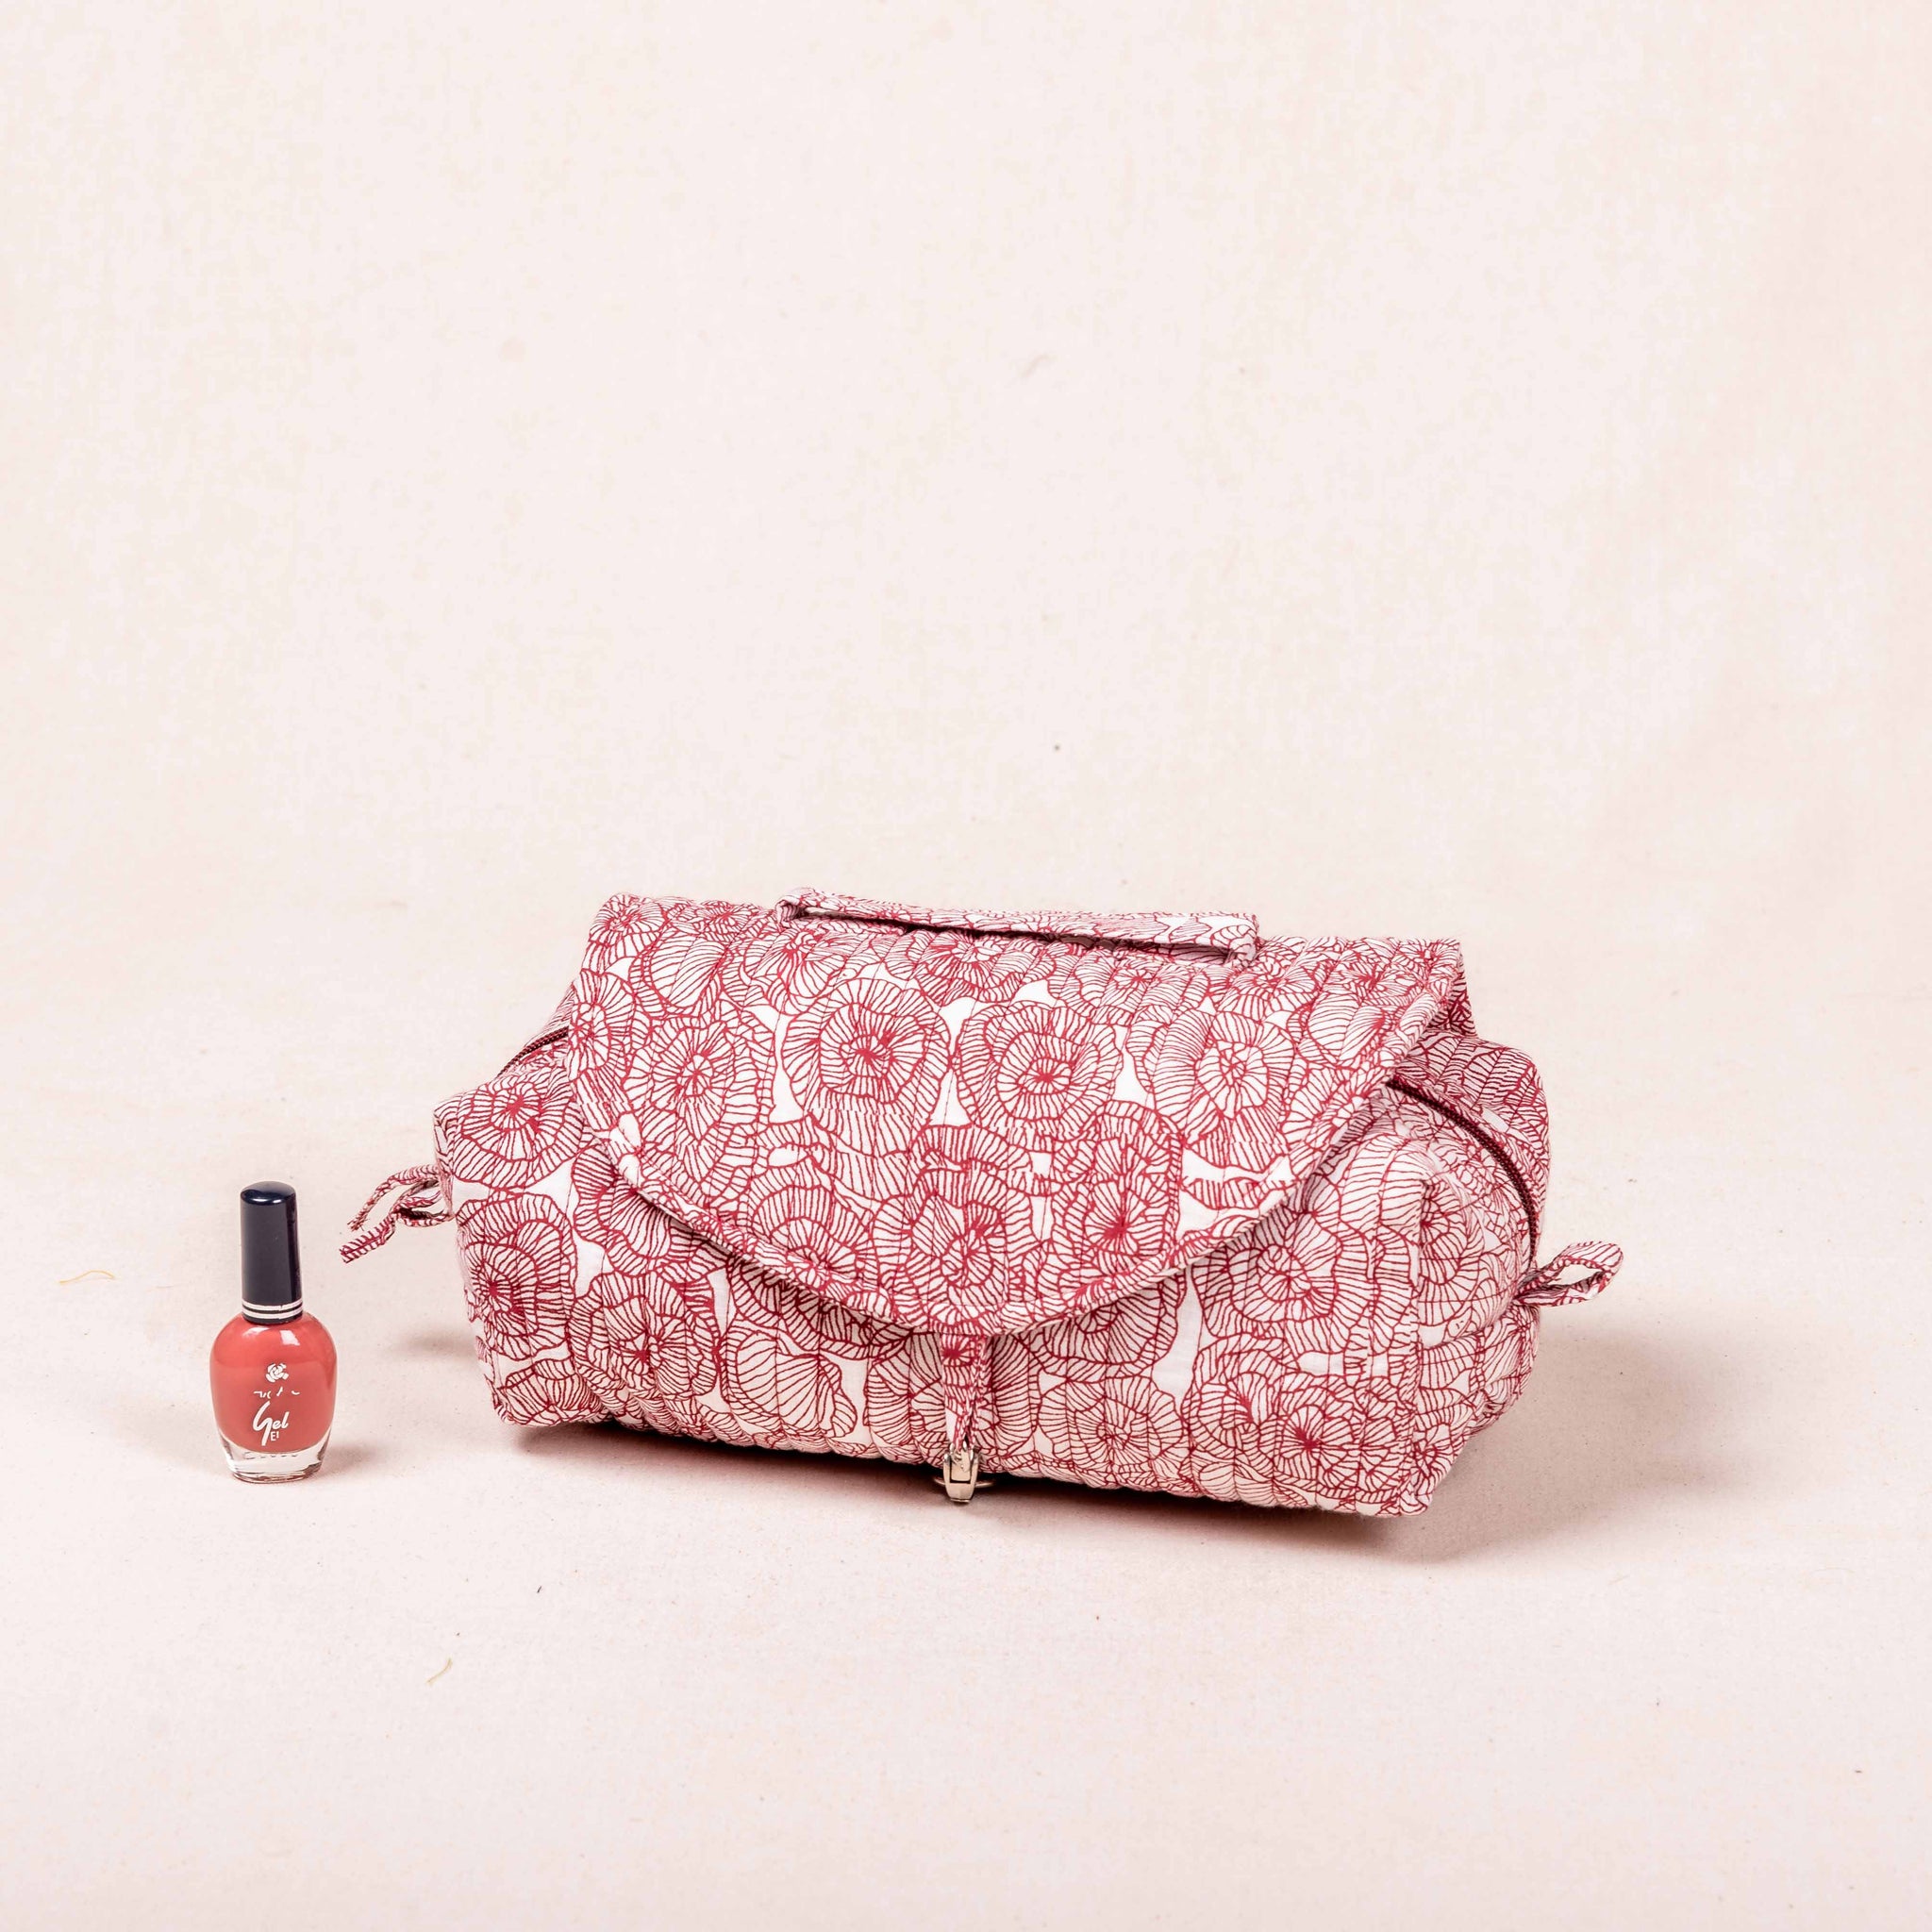 Indu Make-up Pouch - Maroon and White